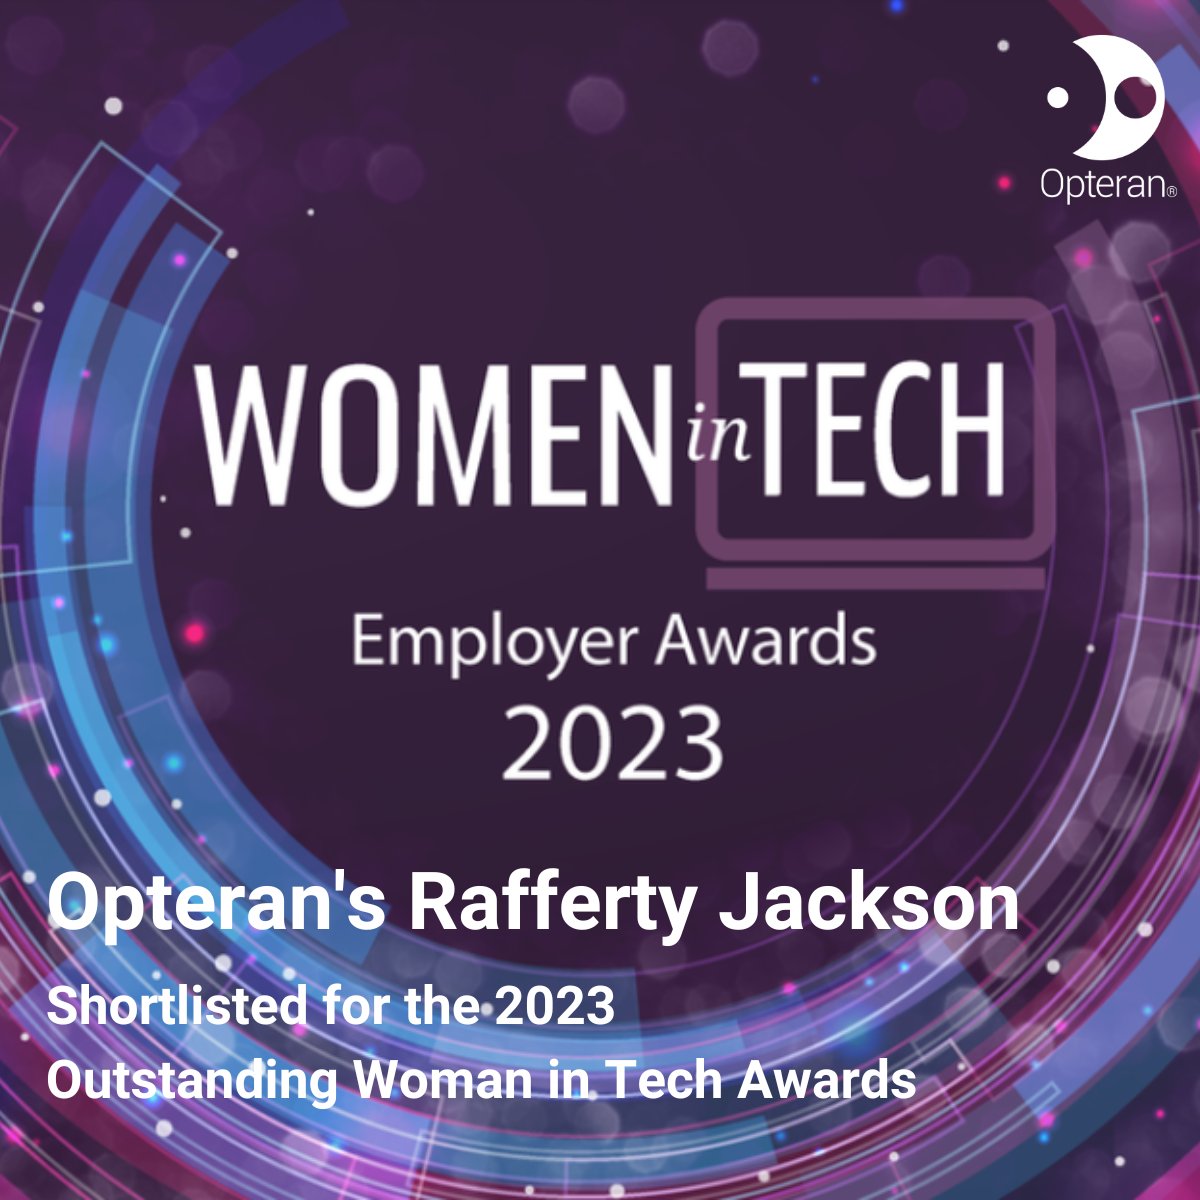 It's awards night!! We're celebrating not only Rafferty Jackson but all the nominees for promoting diversity and inclusion. #Opteran #womenintech #WITEAwards #WomenInSTEM #Robotics #NaturalIntelligence #womenempoweringwomen #diversityandinclusion #culture